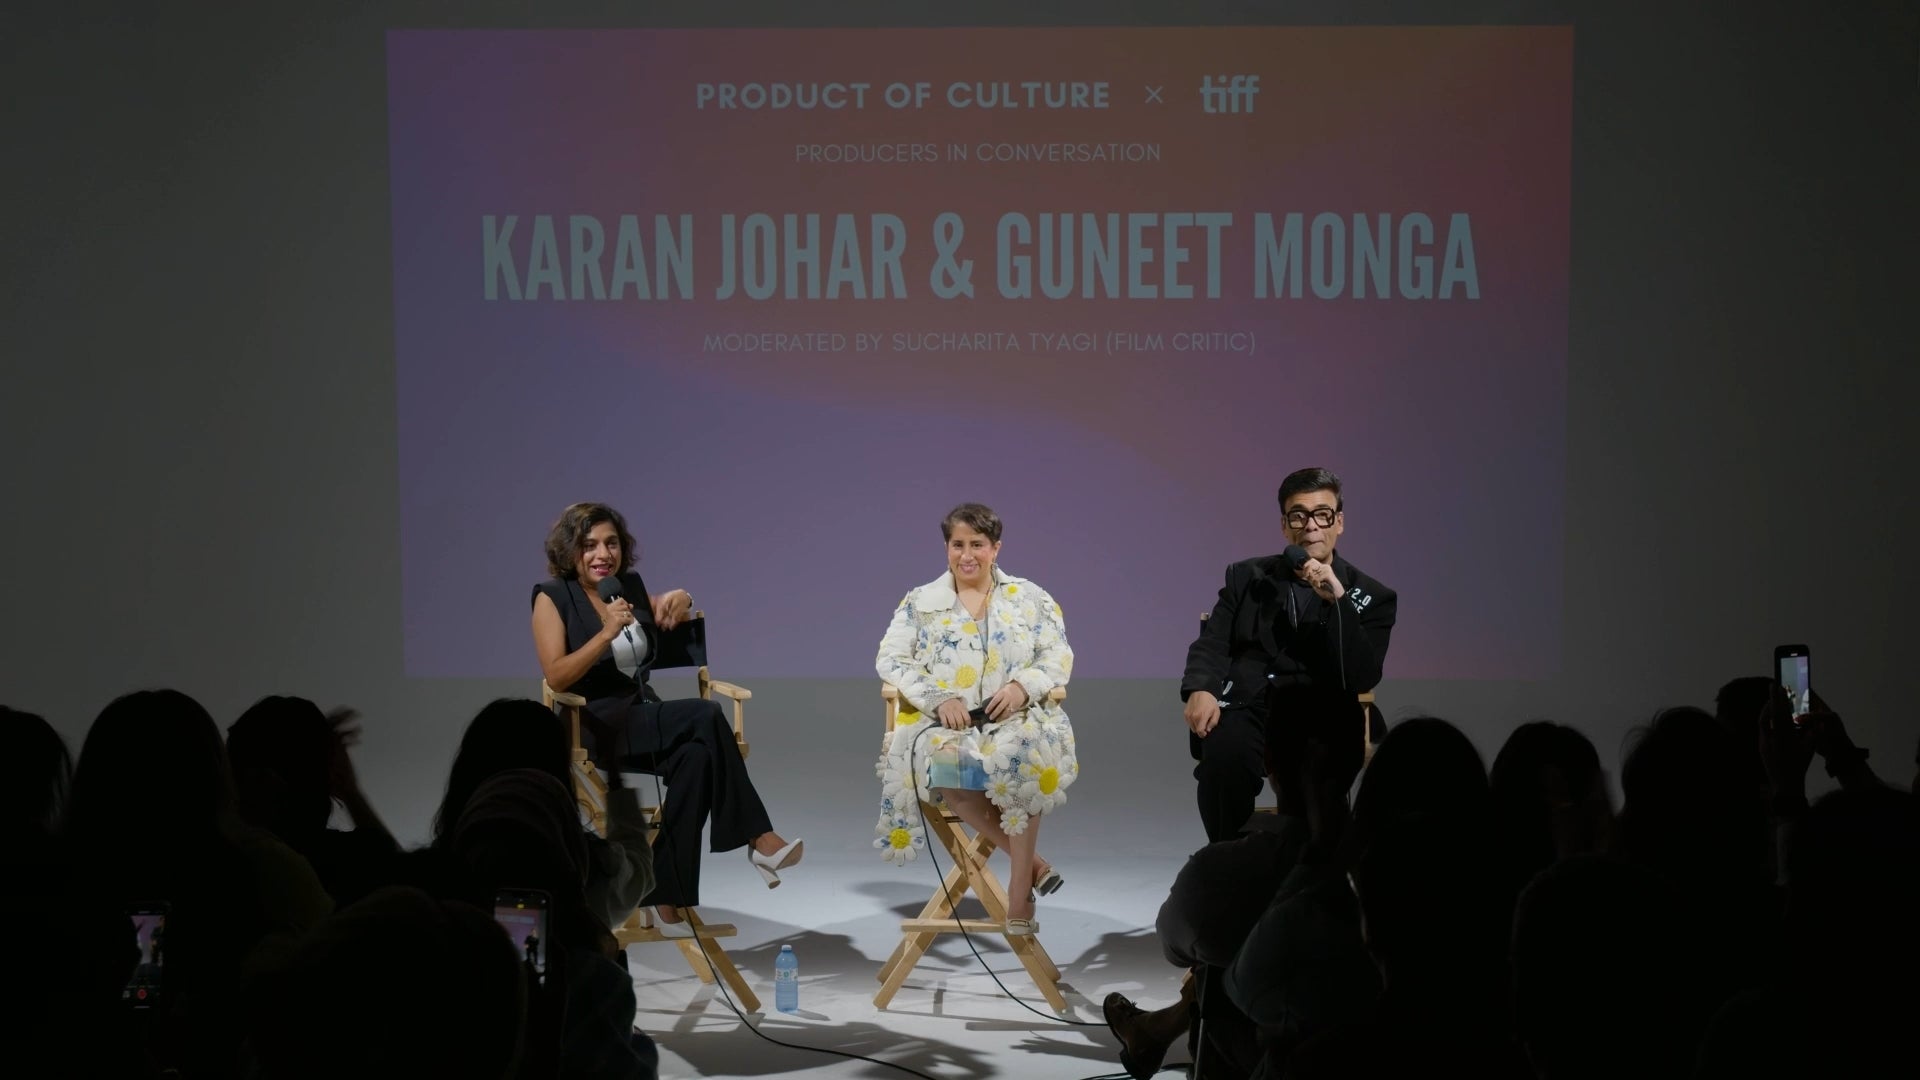 Film Release Q&A with Producer Karan Johar and Guneet Monga at StartWell's Event Studio in Toronto